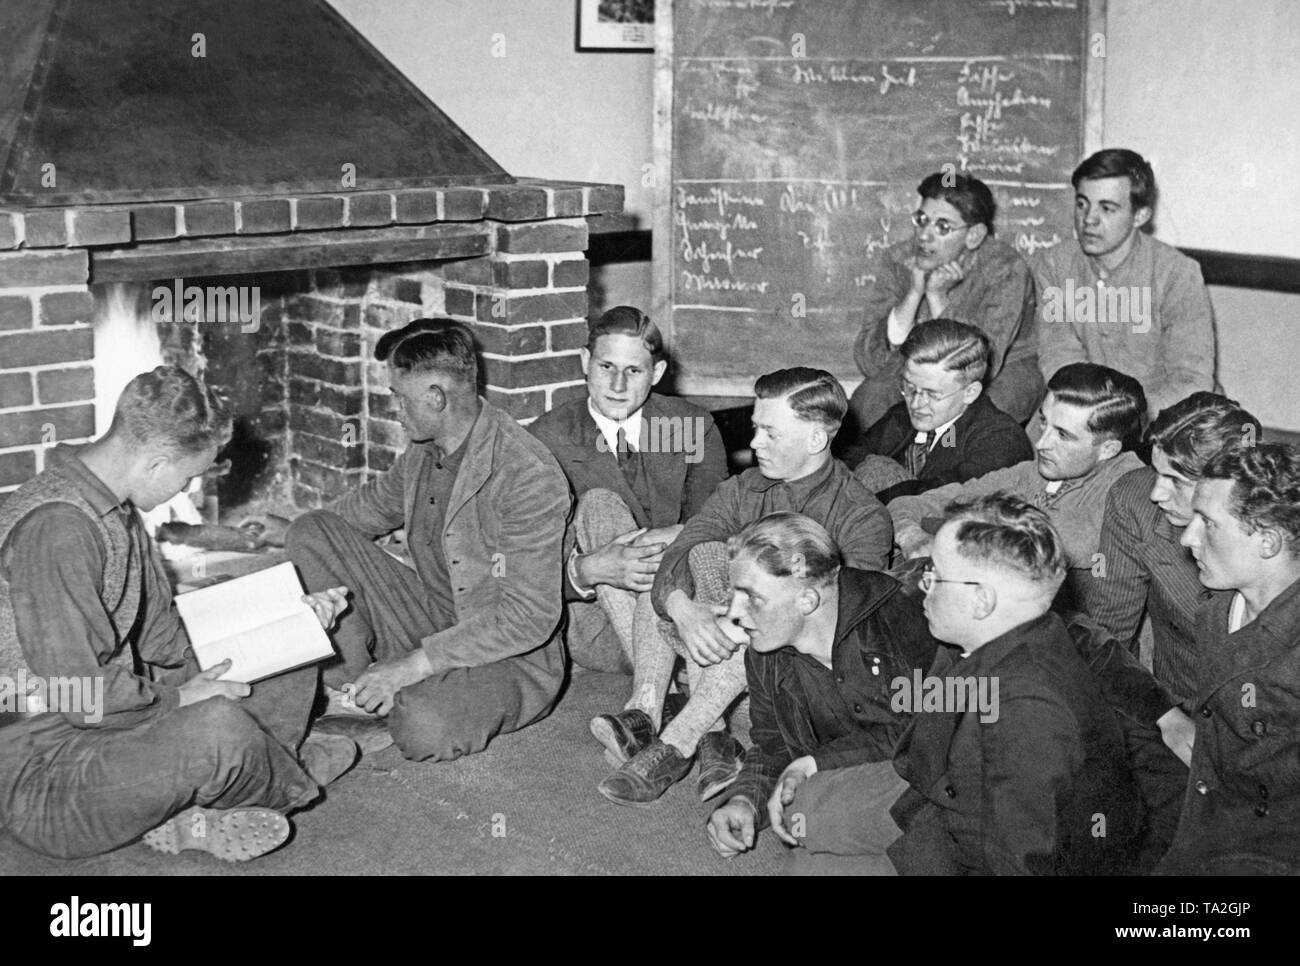 Members of the Deutsche Freischar sit together in front of a fireplace, one of the young men is reading from a book. Stock Photo